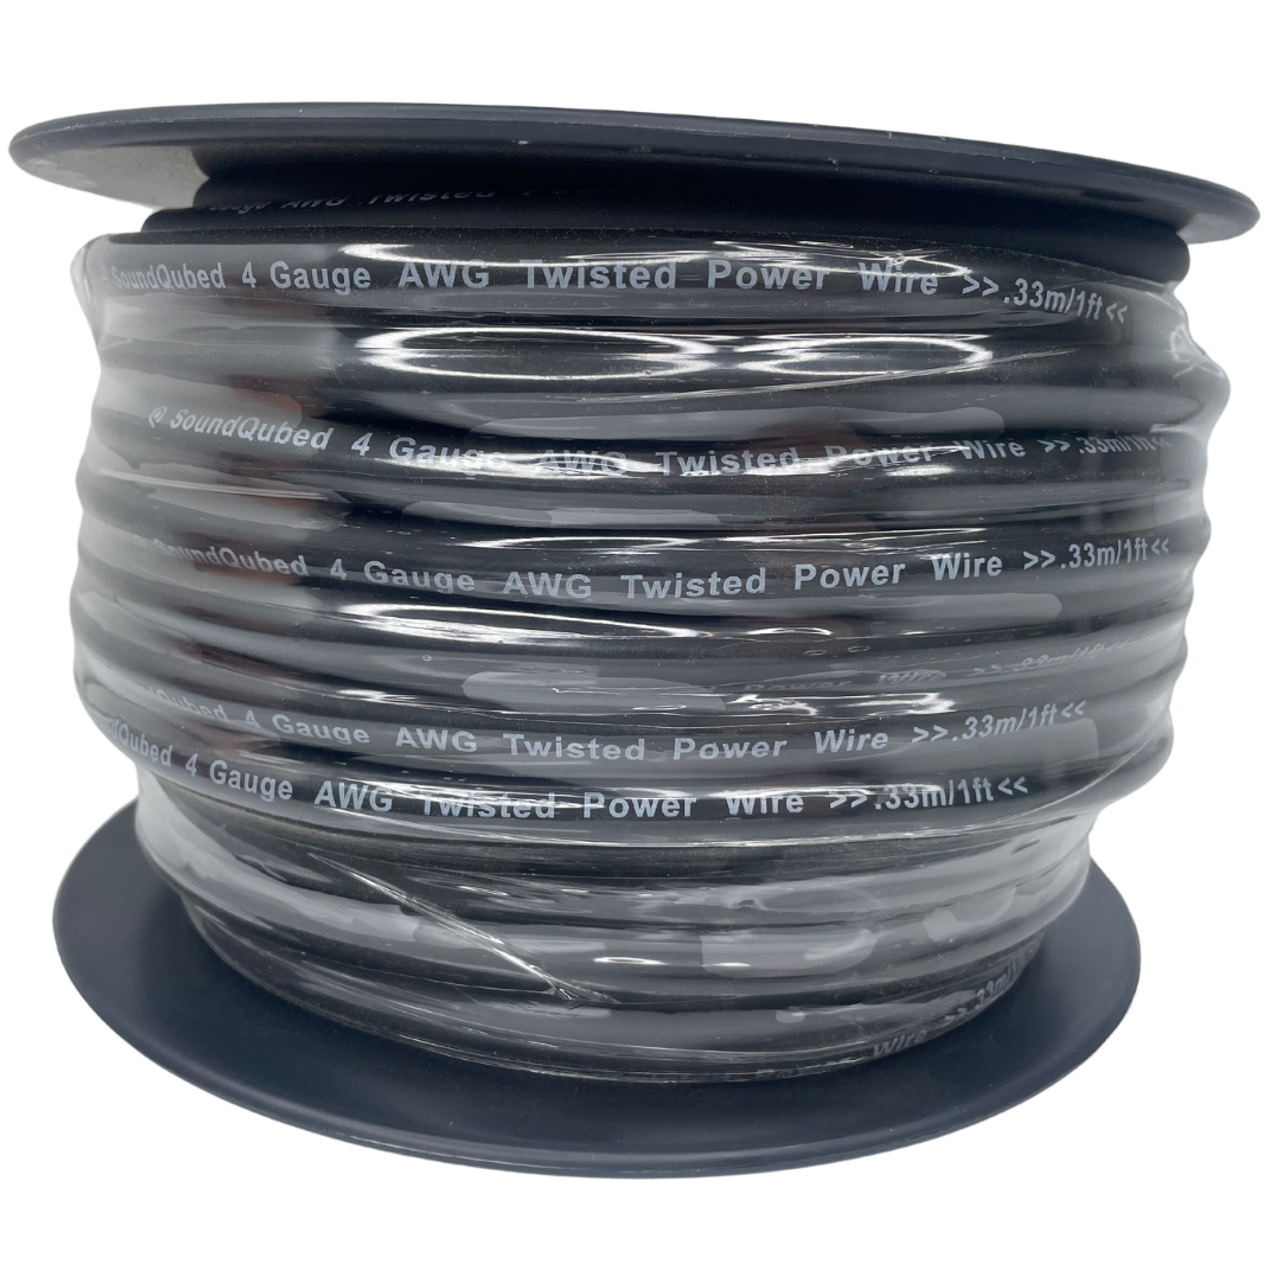 SOUNDQUBED 4ga Power and Ground Wire (100ft Spool)